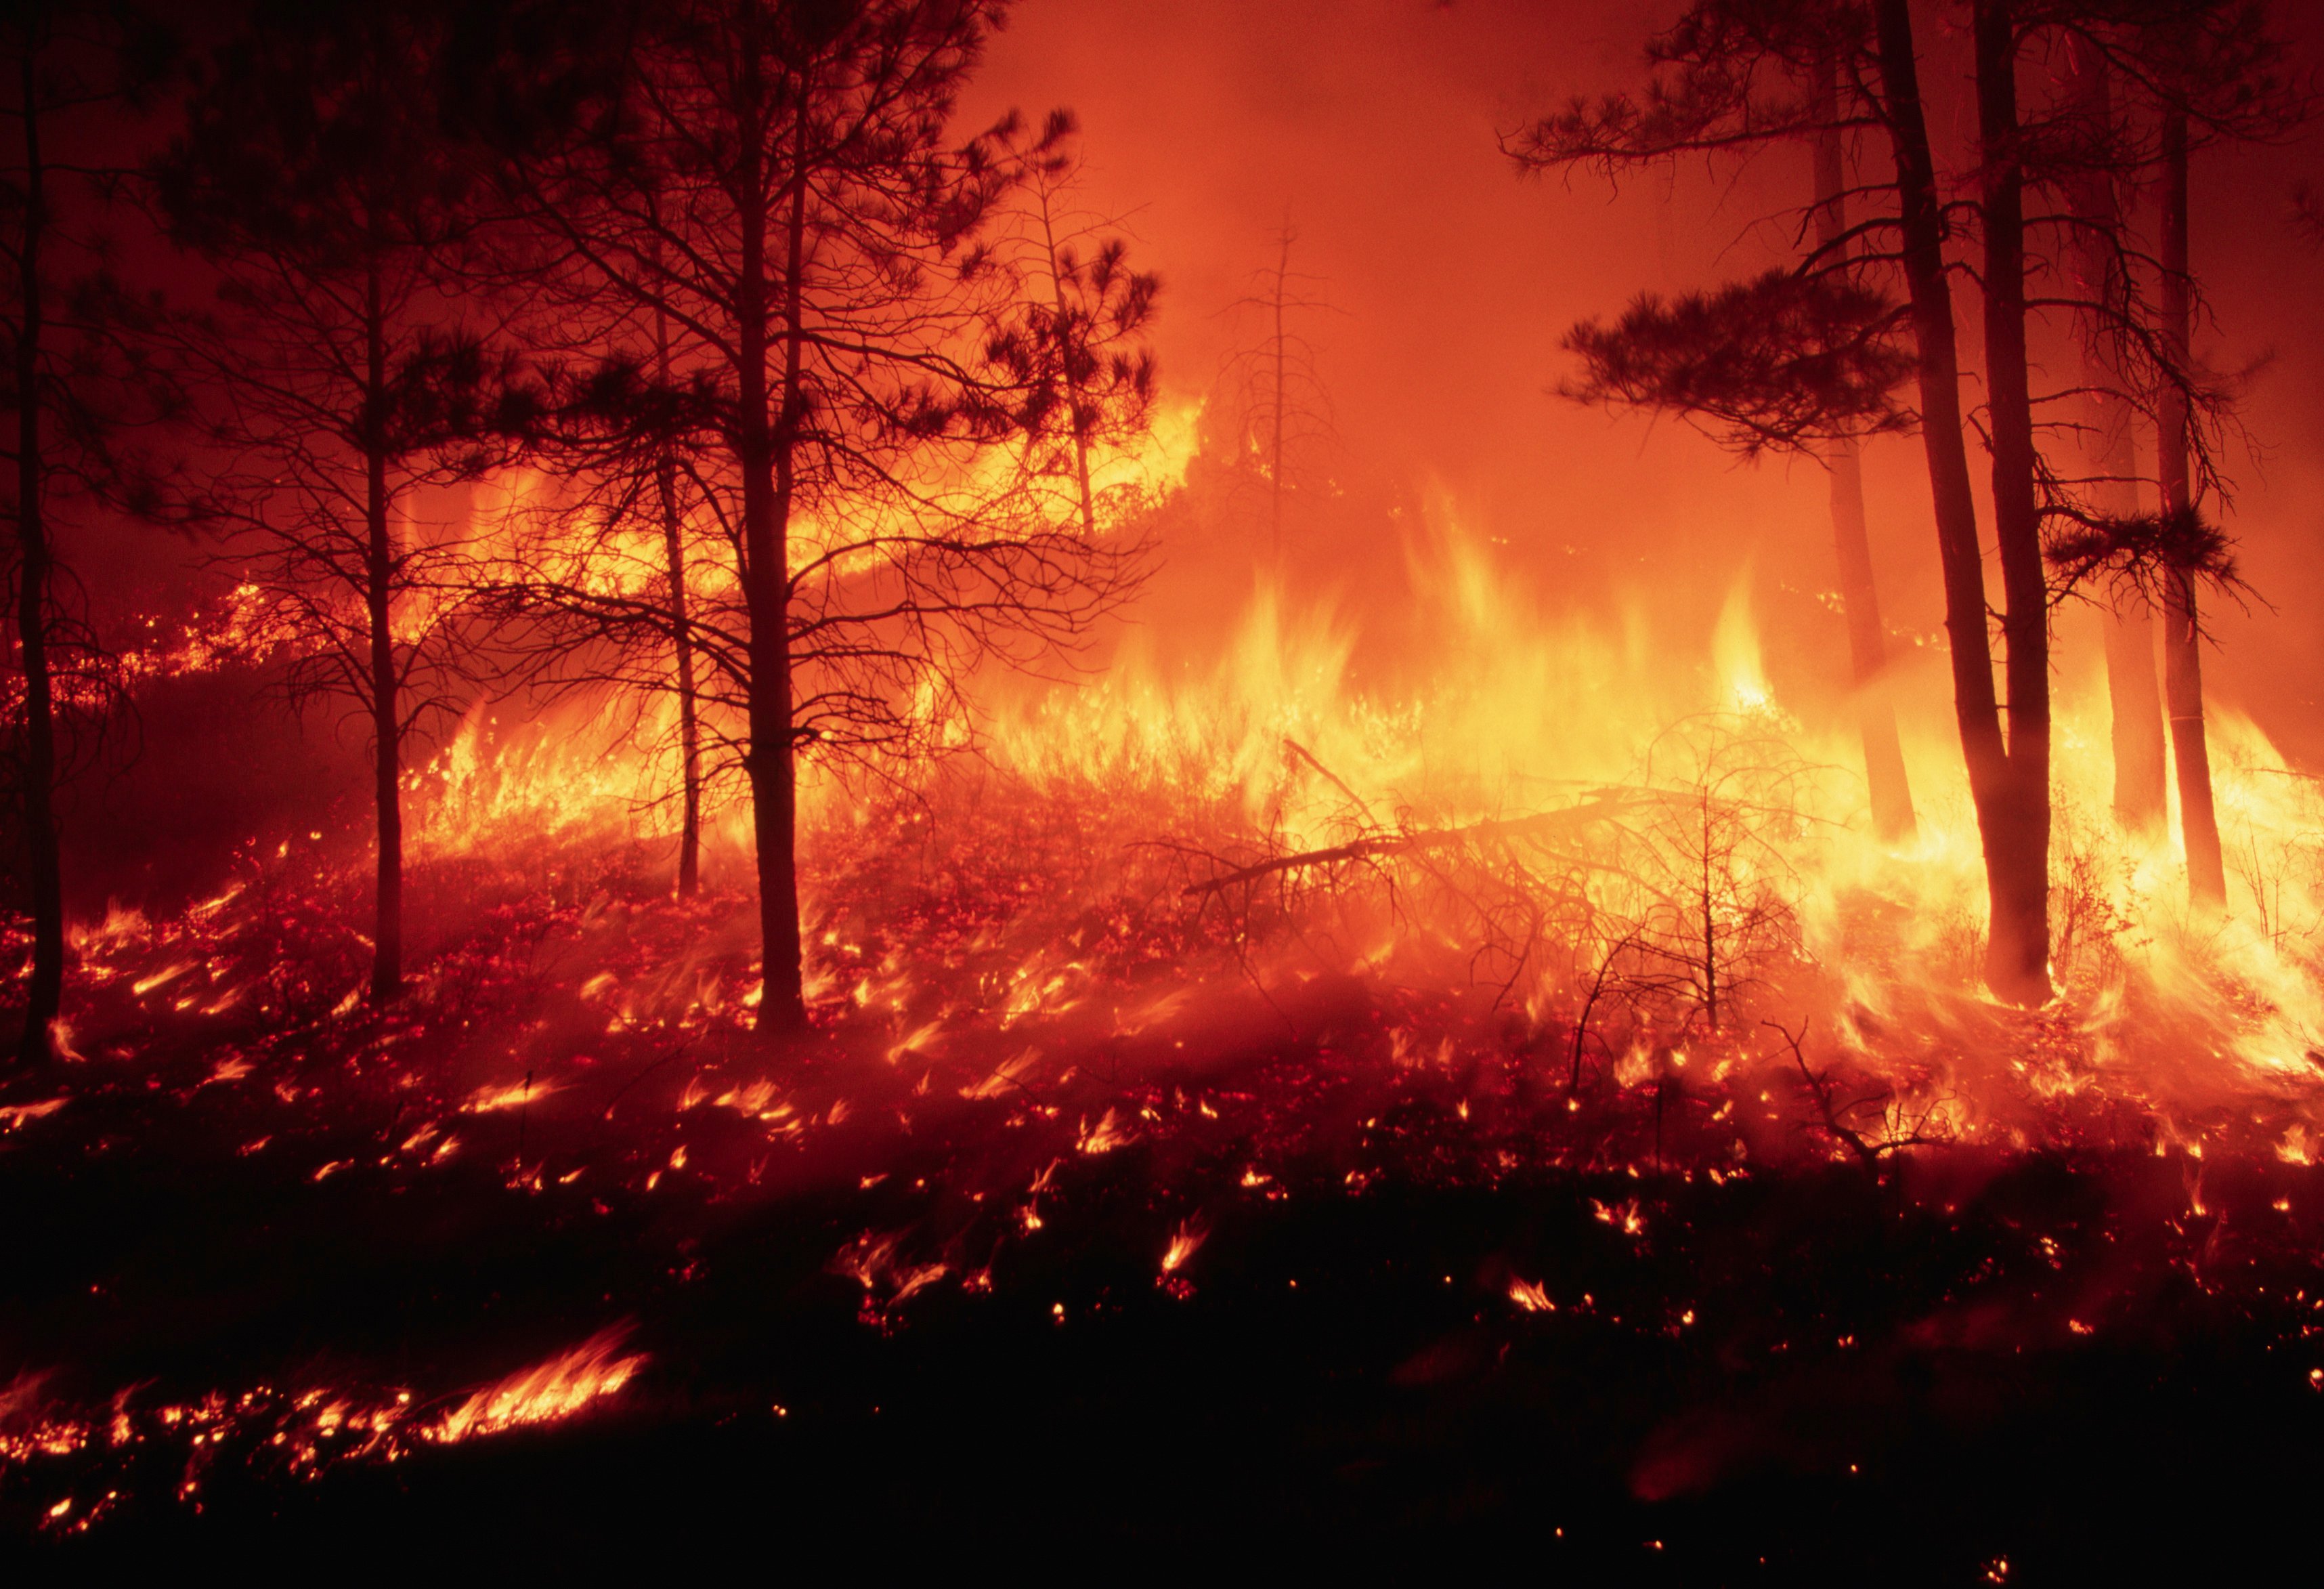 A forest fire burns out of control in a pine forest on the Mescalero Apache Indian Reservation in the US state of New Mexico. The UN secretary general said recently the “era of global boiling has arrived”. Photo: 
Getty Images